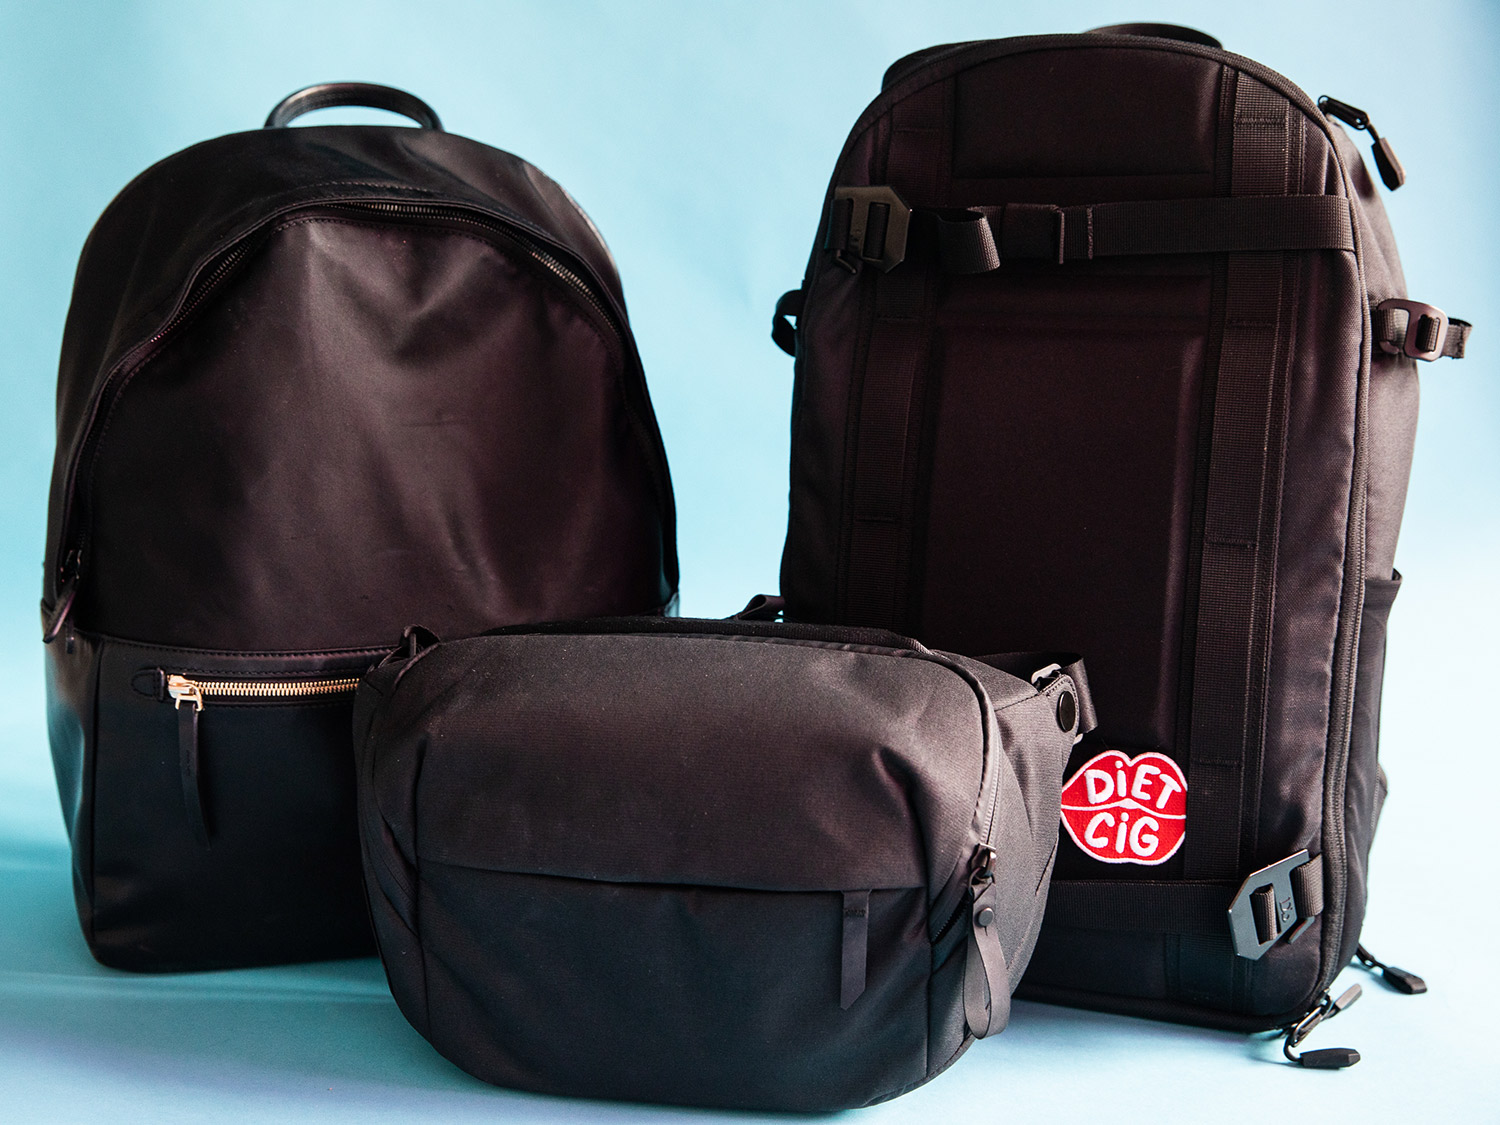 These compact camera bags carry just the right amount of gear